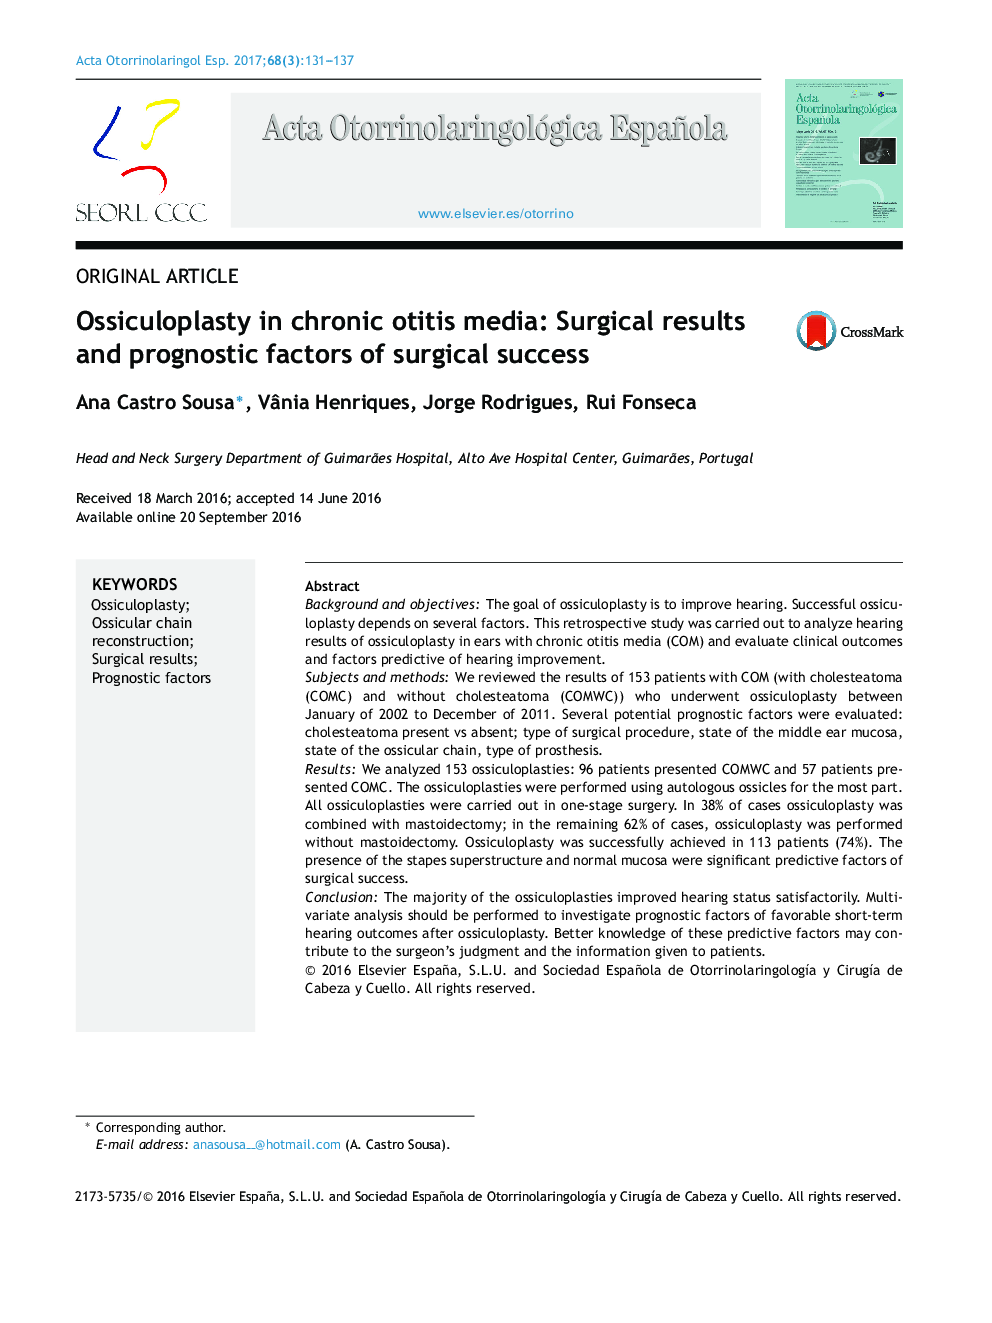 Ossiculoplasty in chronic otitis media: Surgical results and prognostic factors of surgical success